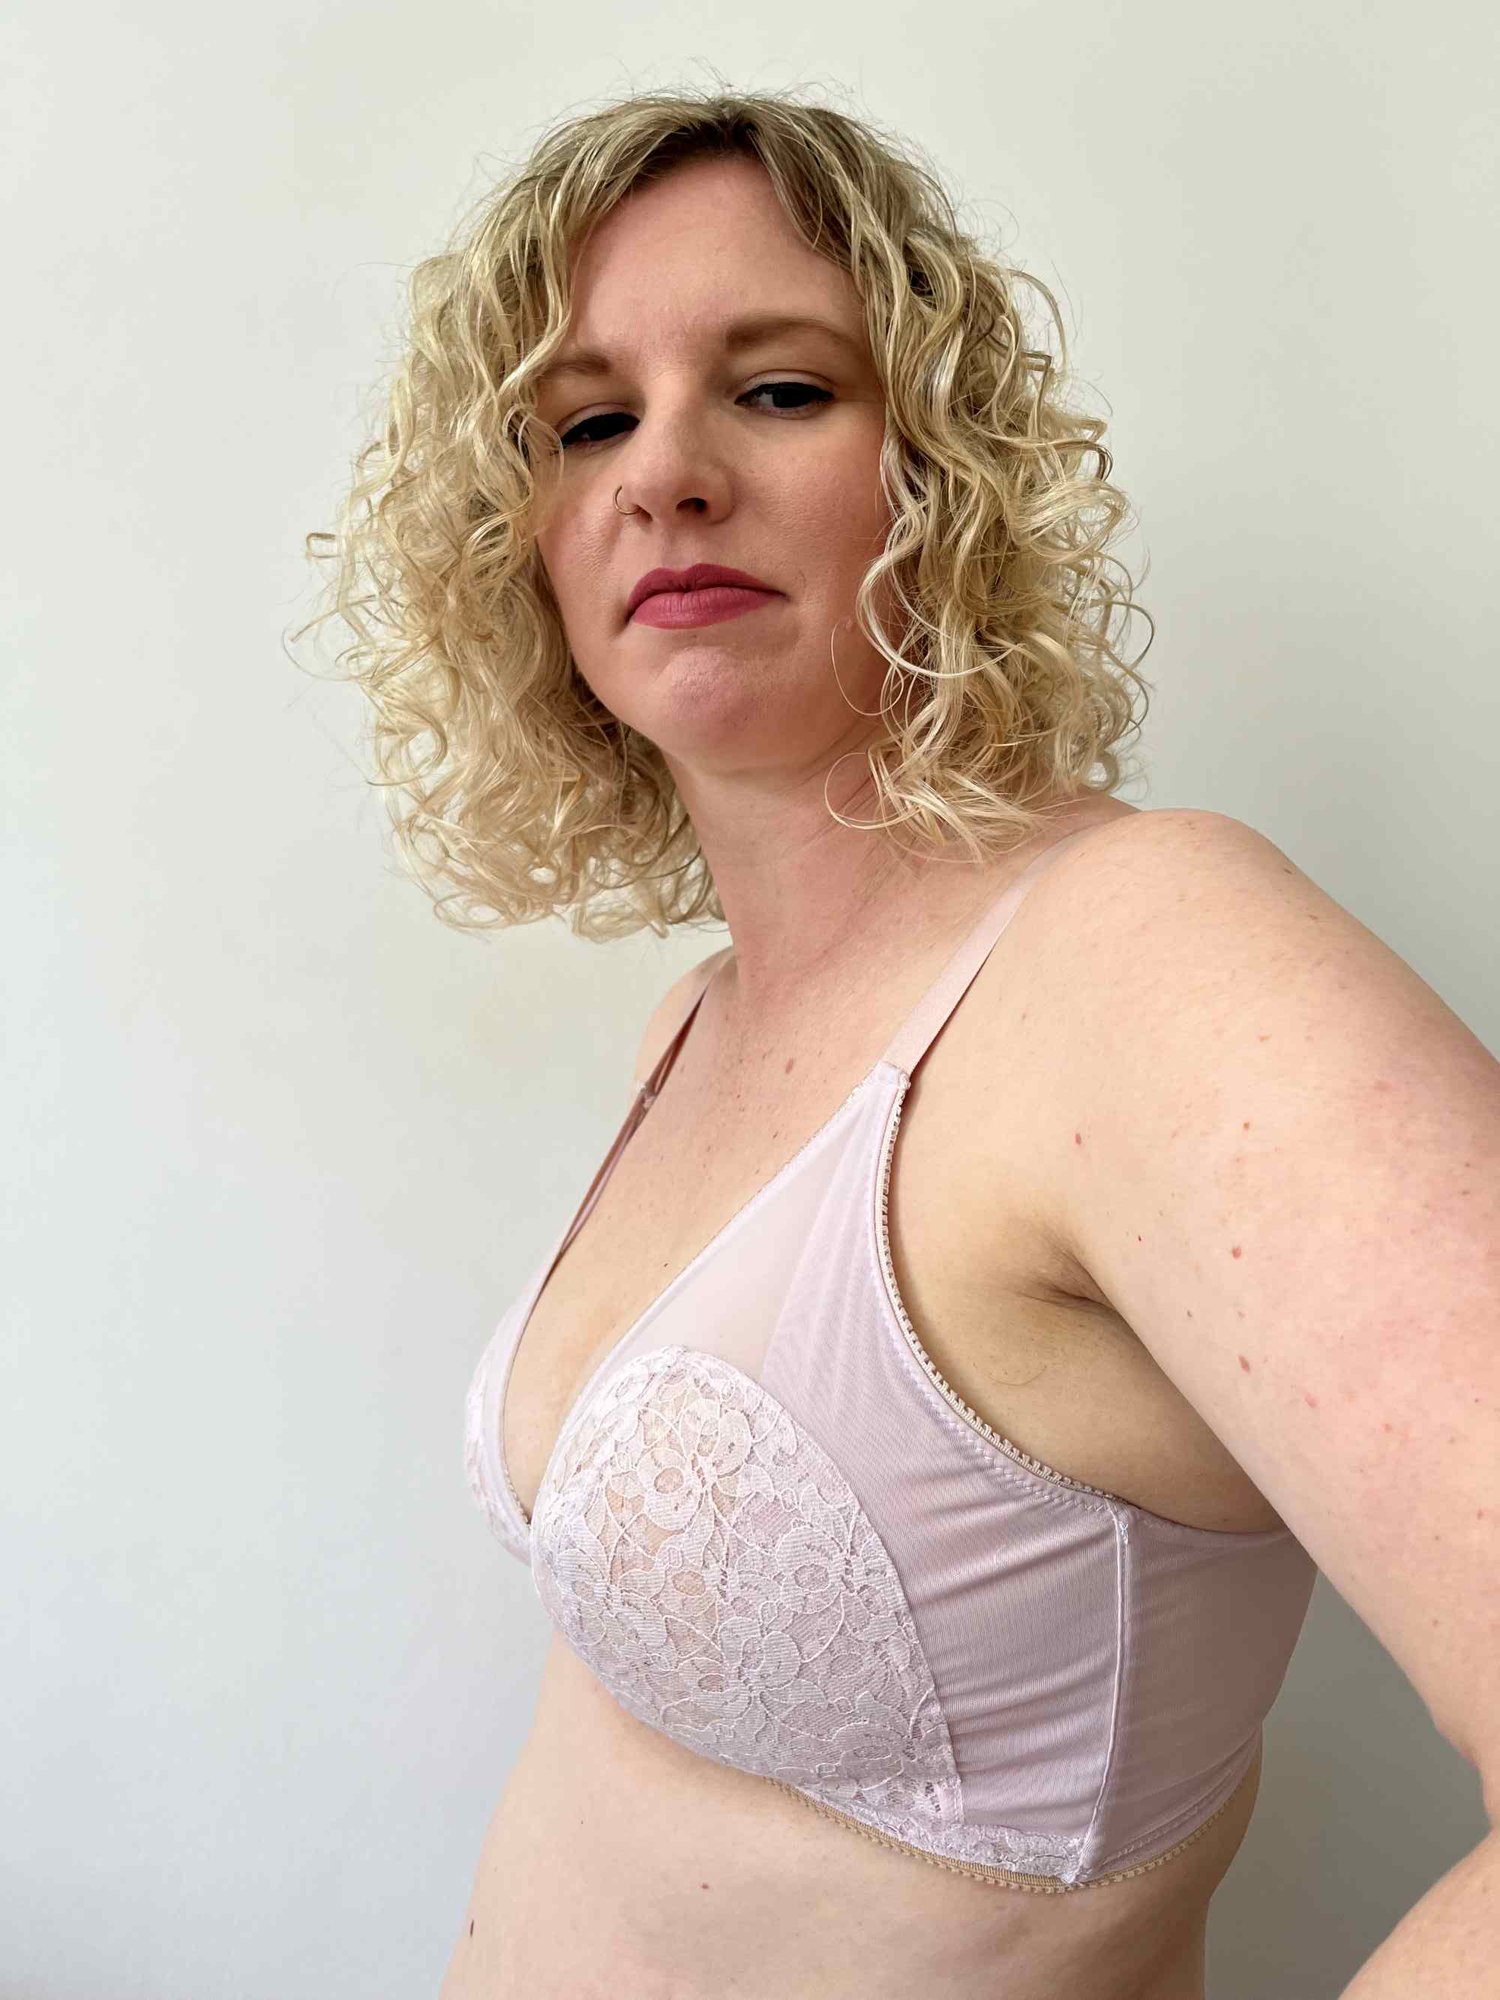 Soft Cup Full Band Bra / Bralette Sewing Pattern All Sizes. One